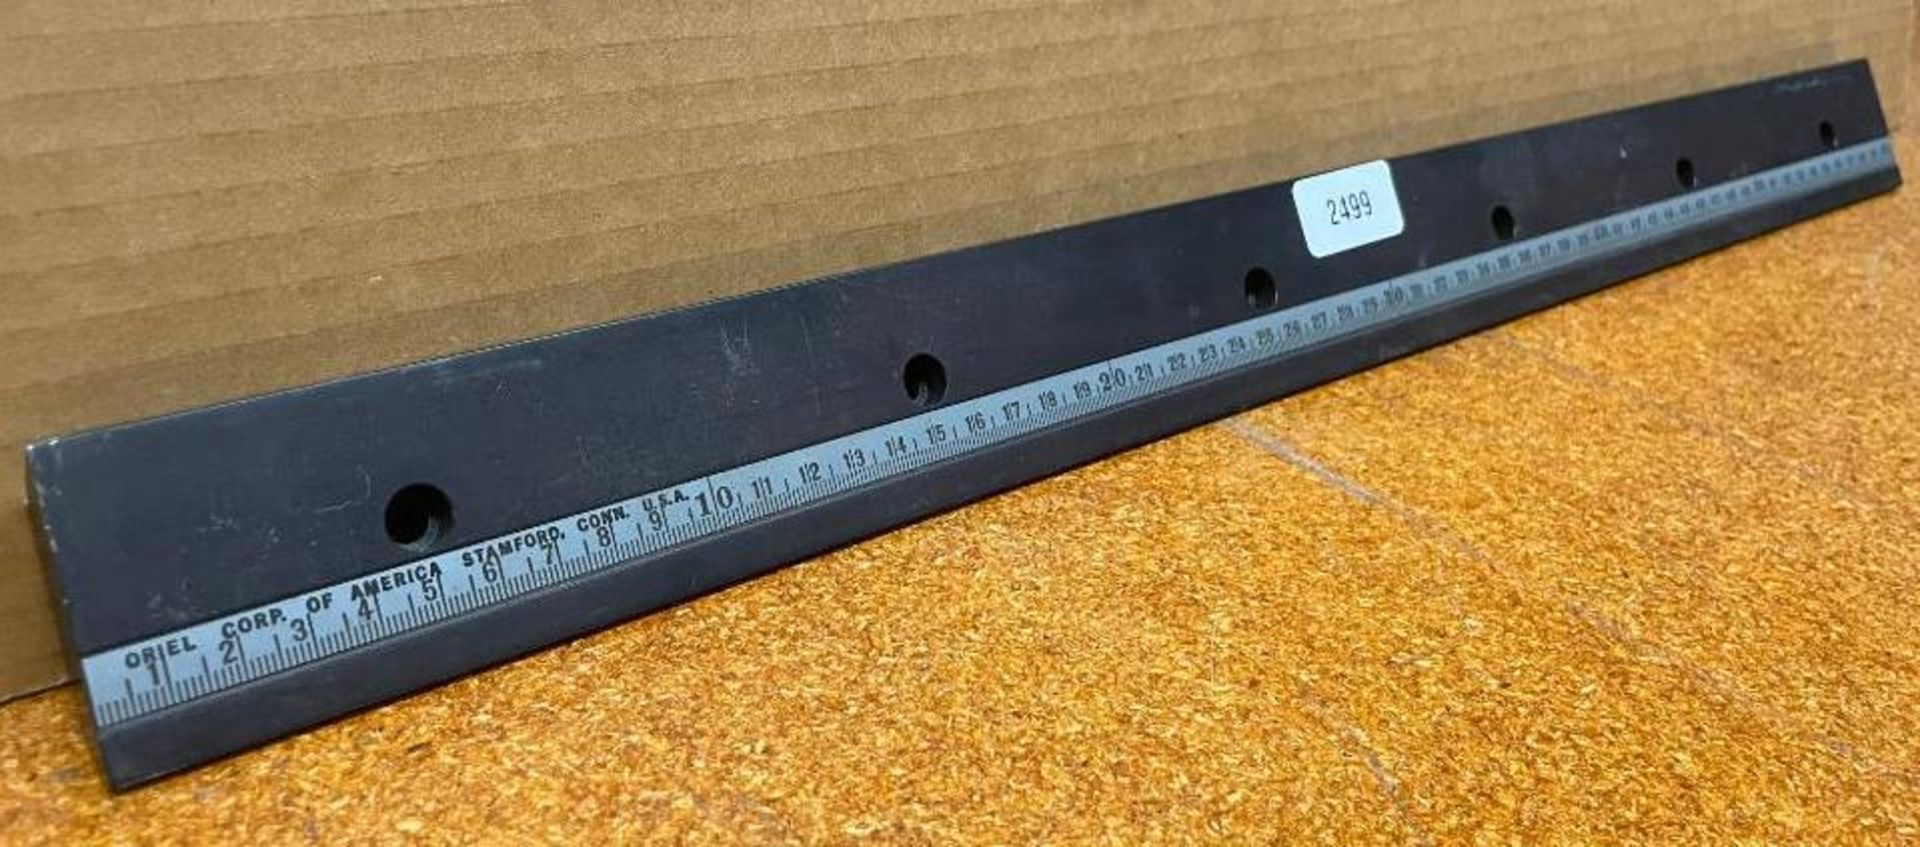 OPTICAL RAIL WITH RULER BRAND/MODEL: ORIEL INFORMATION: 60cm LONG, 5-COUNTERSUNK HOLES QTY: 1